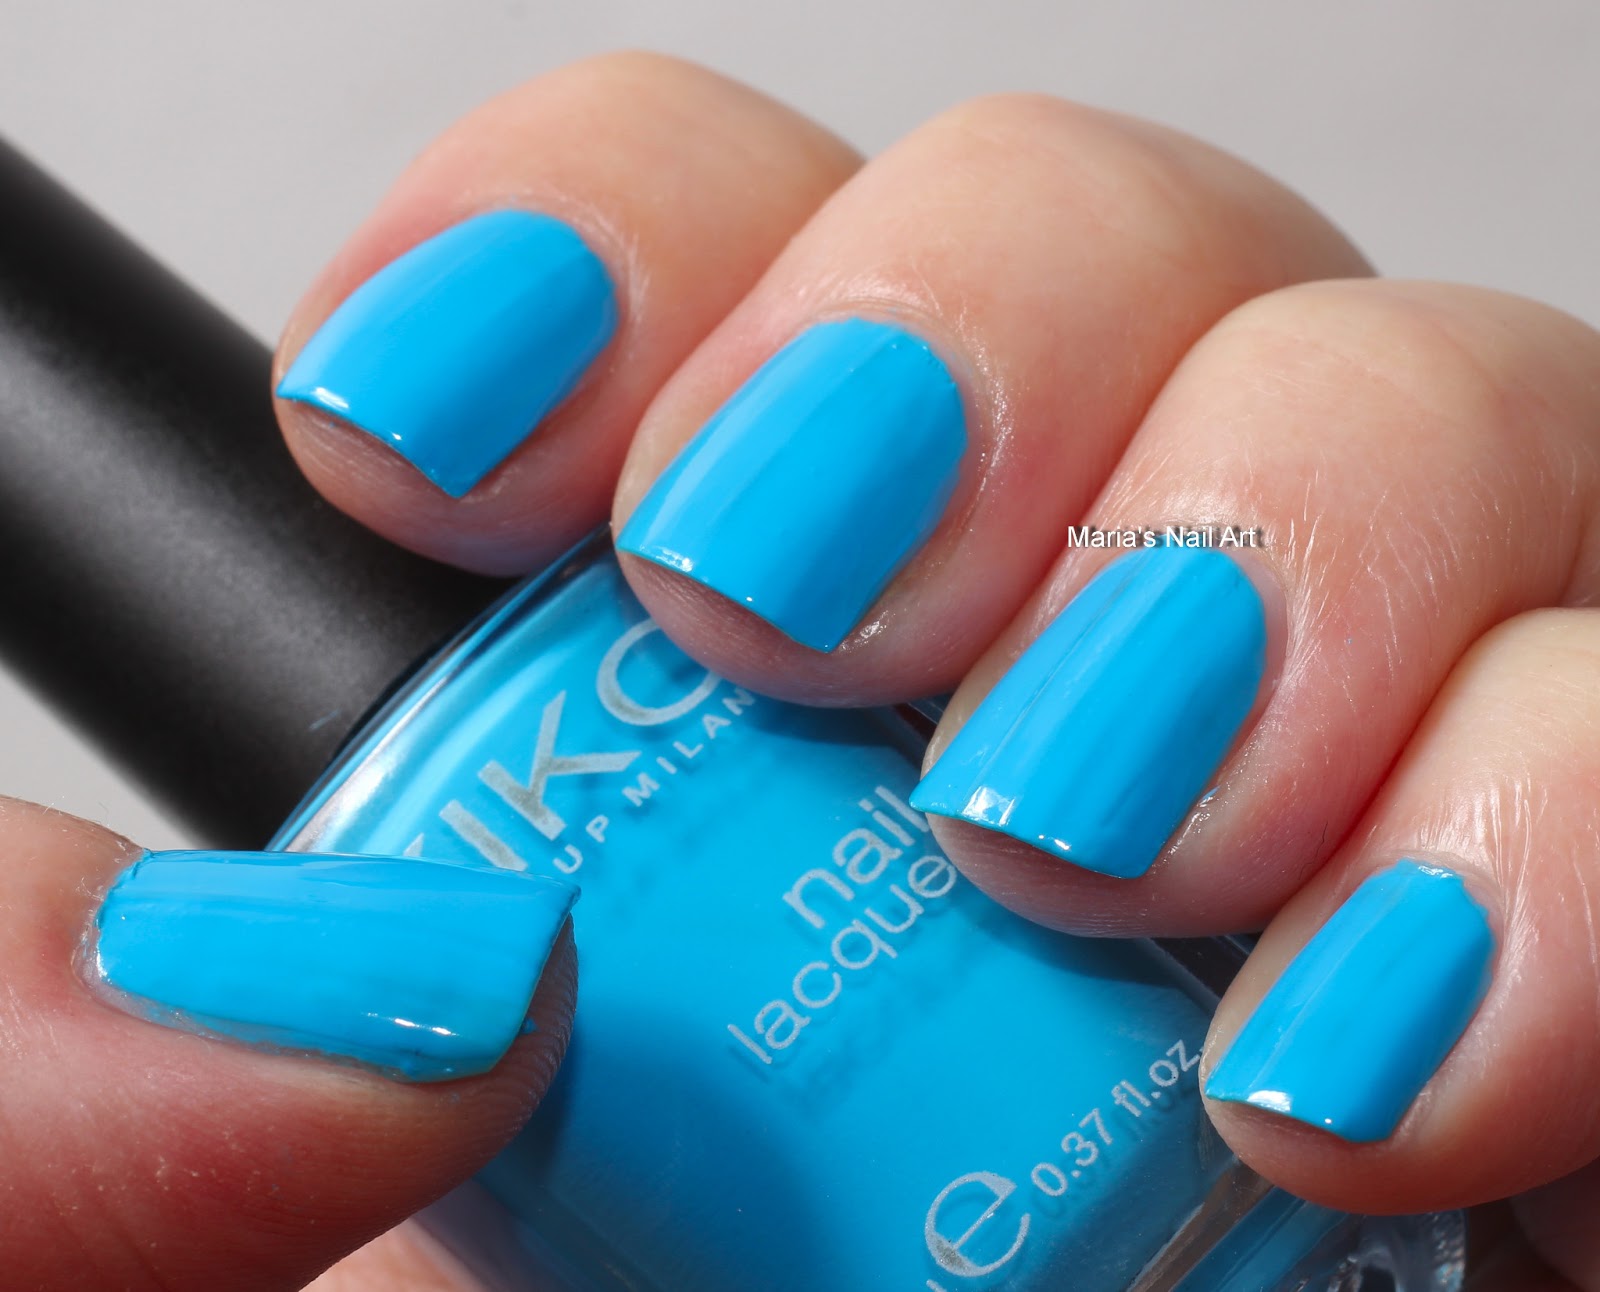 10. Kiko Milano Nail Lacquer in "Turquoise Blue" - wide 6